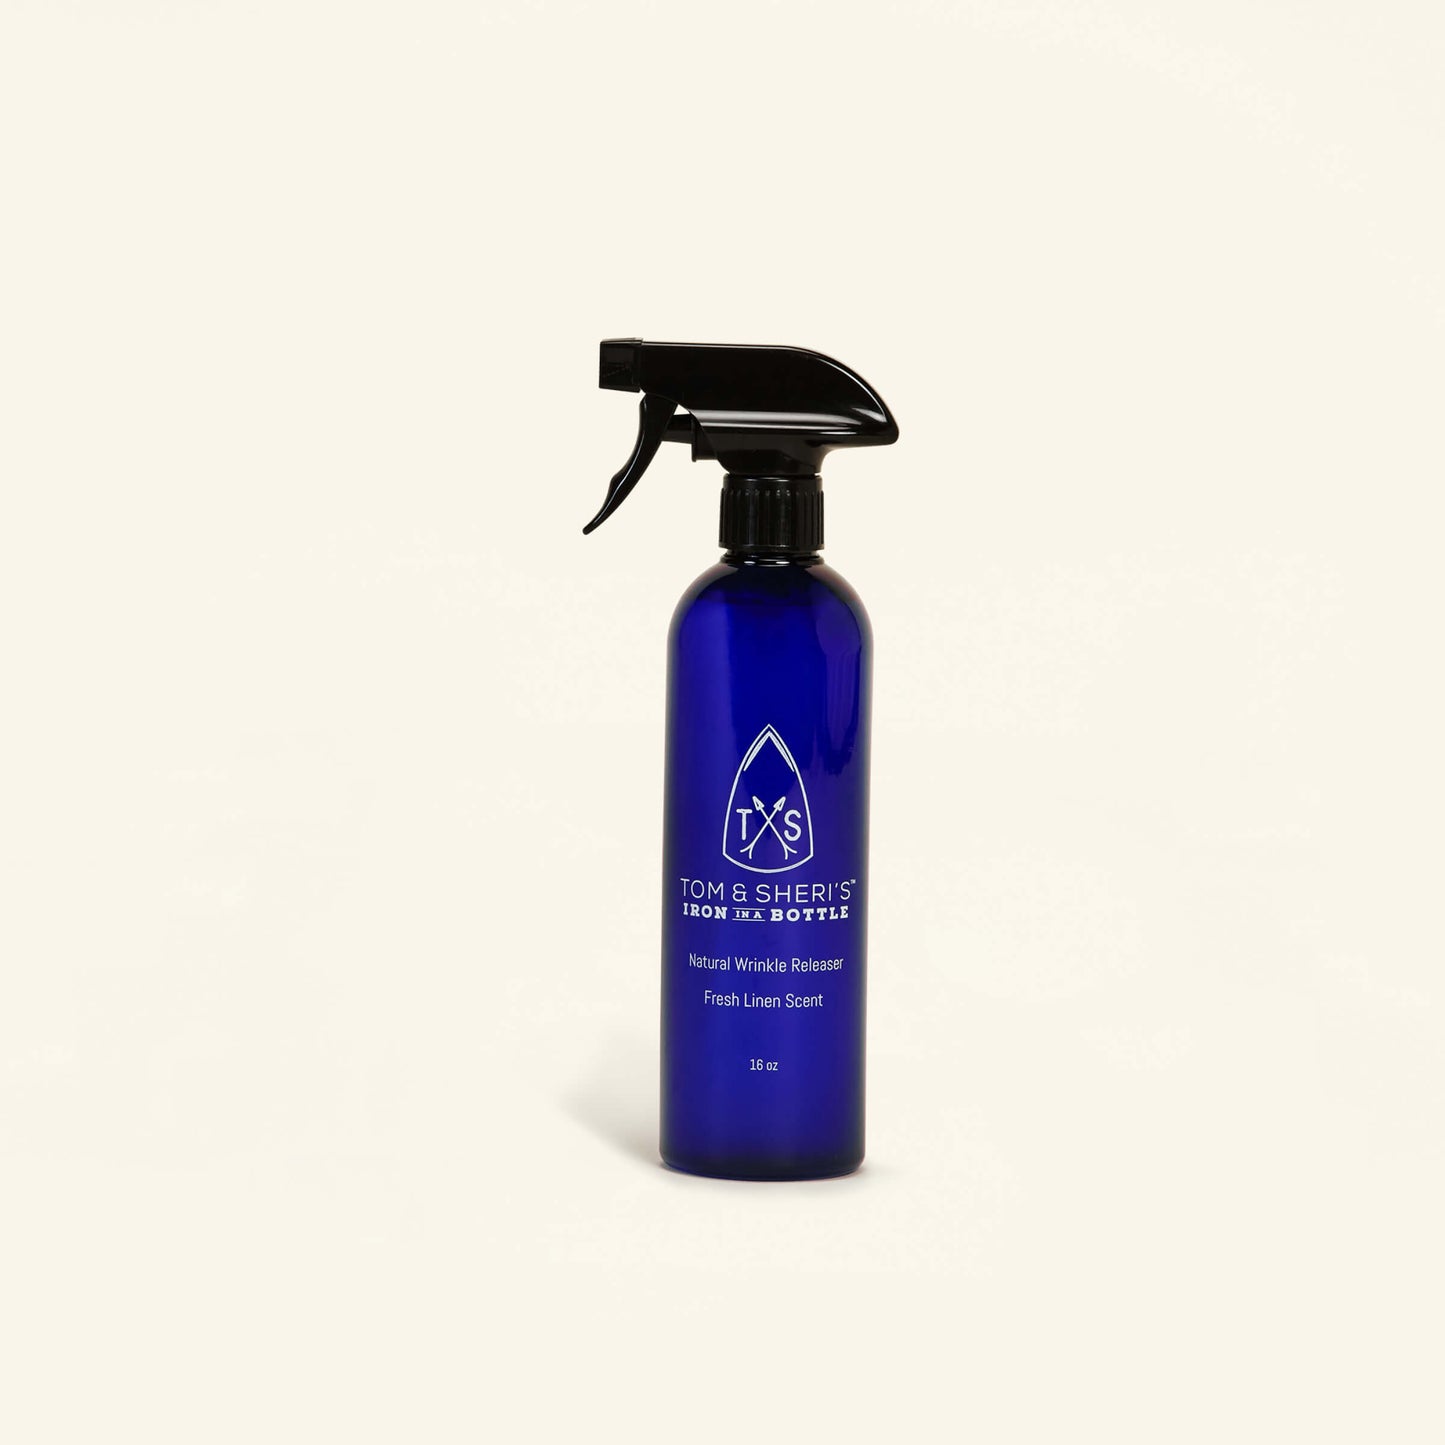 The Tom & Sheri’s Iron in a Bottle Natural Wrinkle Releaser. Made with plant based ingredients that is gentle on your skin and on your sheets.